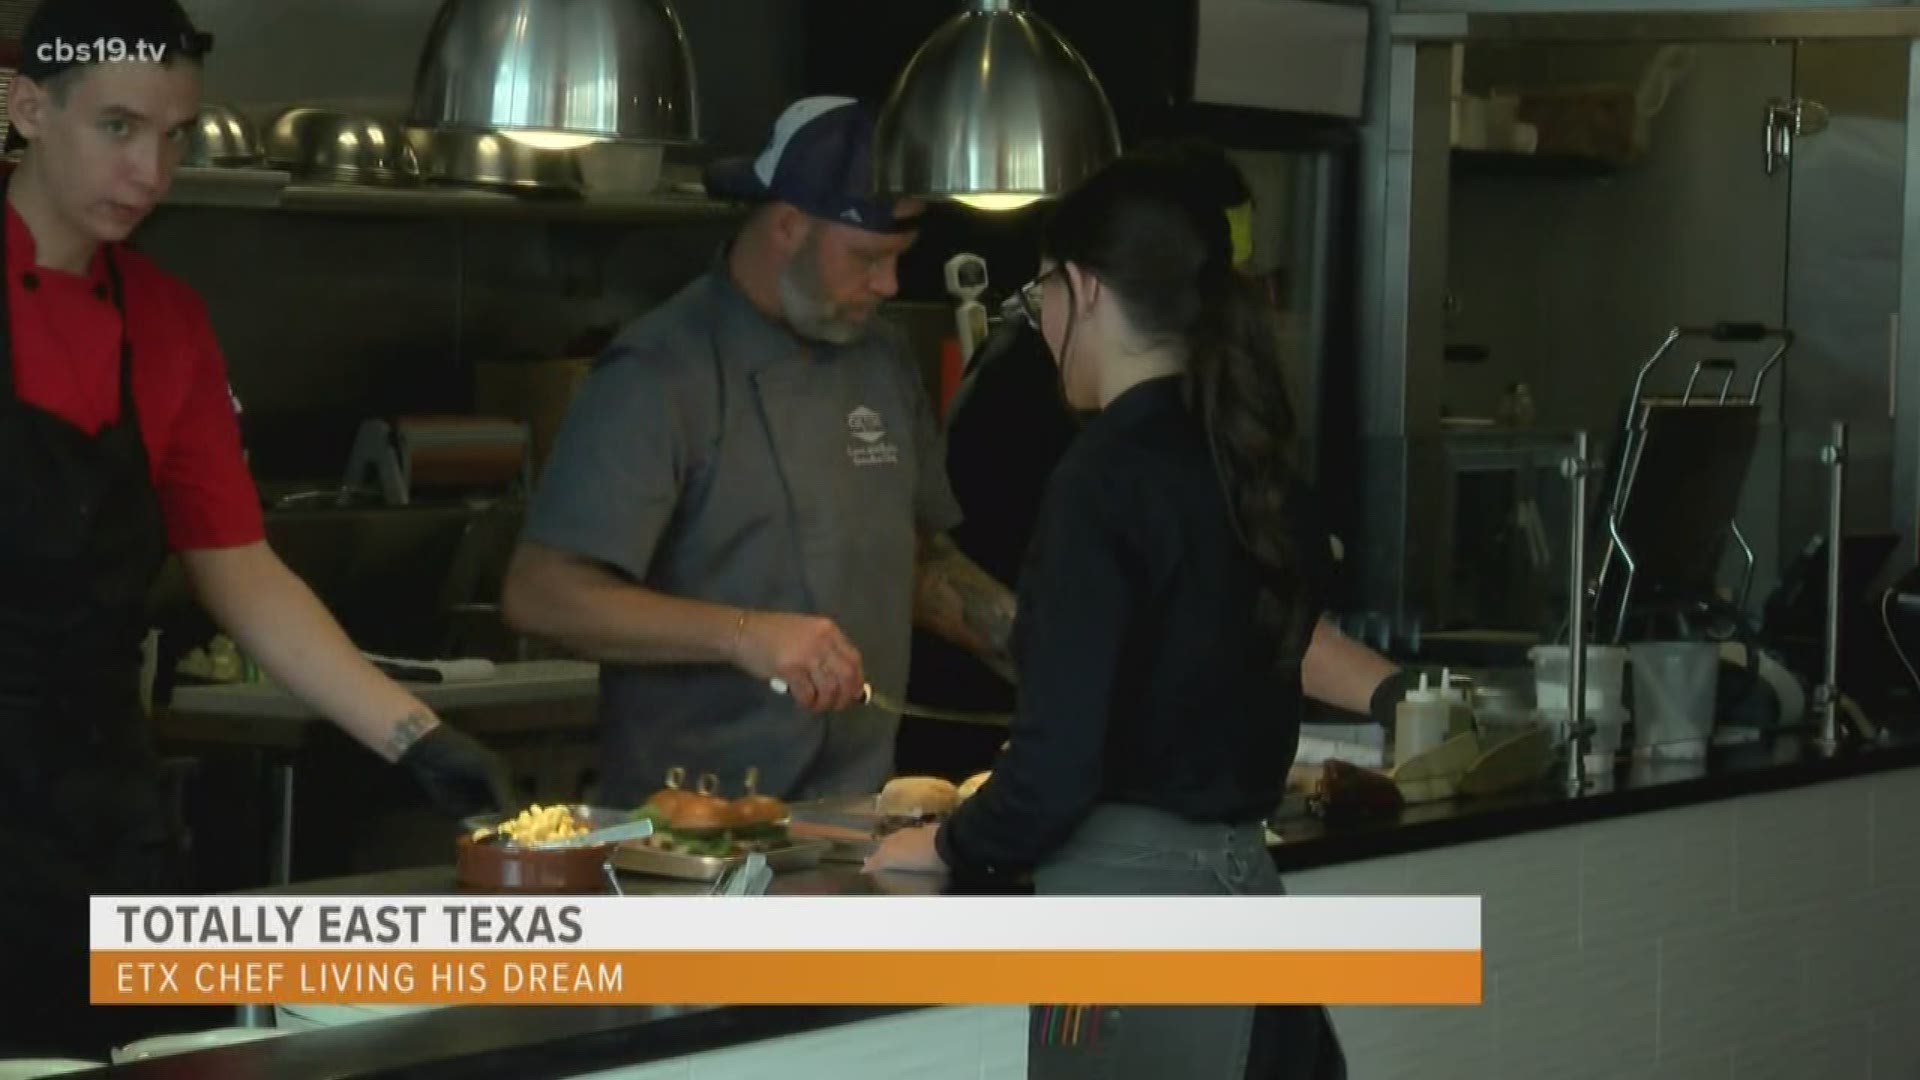 Chef Lance McWhorter of Culture ETX competes on reality cooking show and feeds East Texans hungry for unique flavors. Meet him in Totally East Texas!